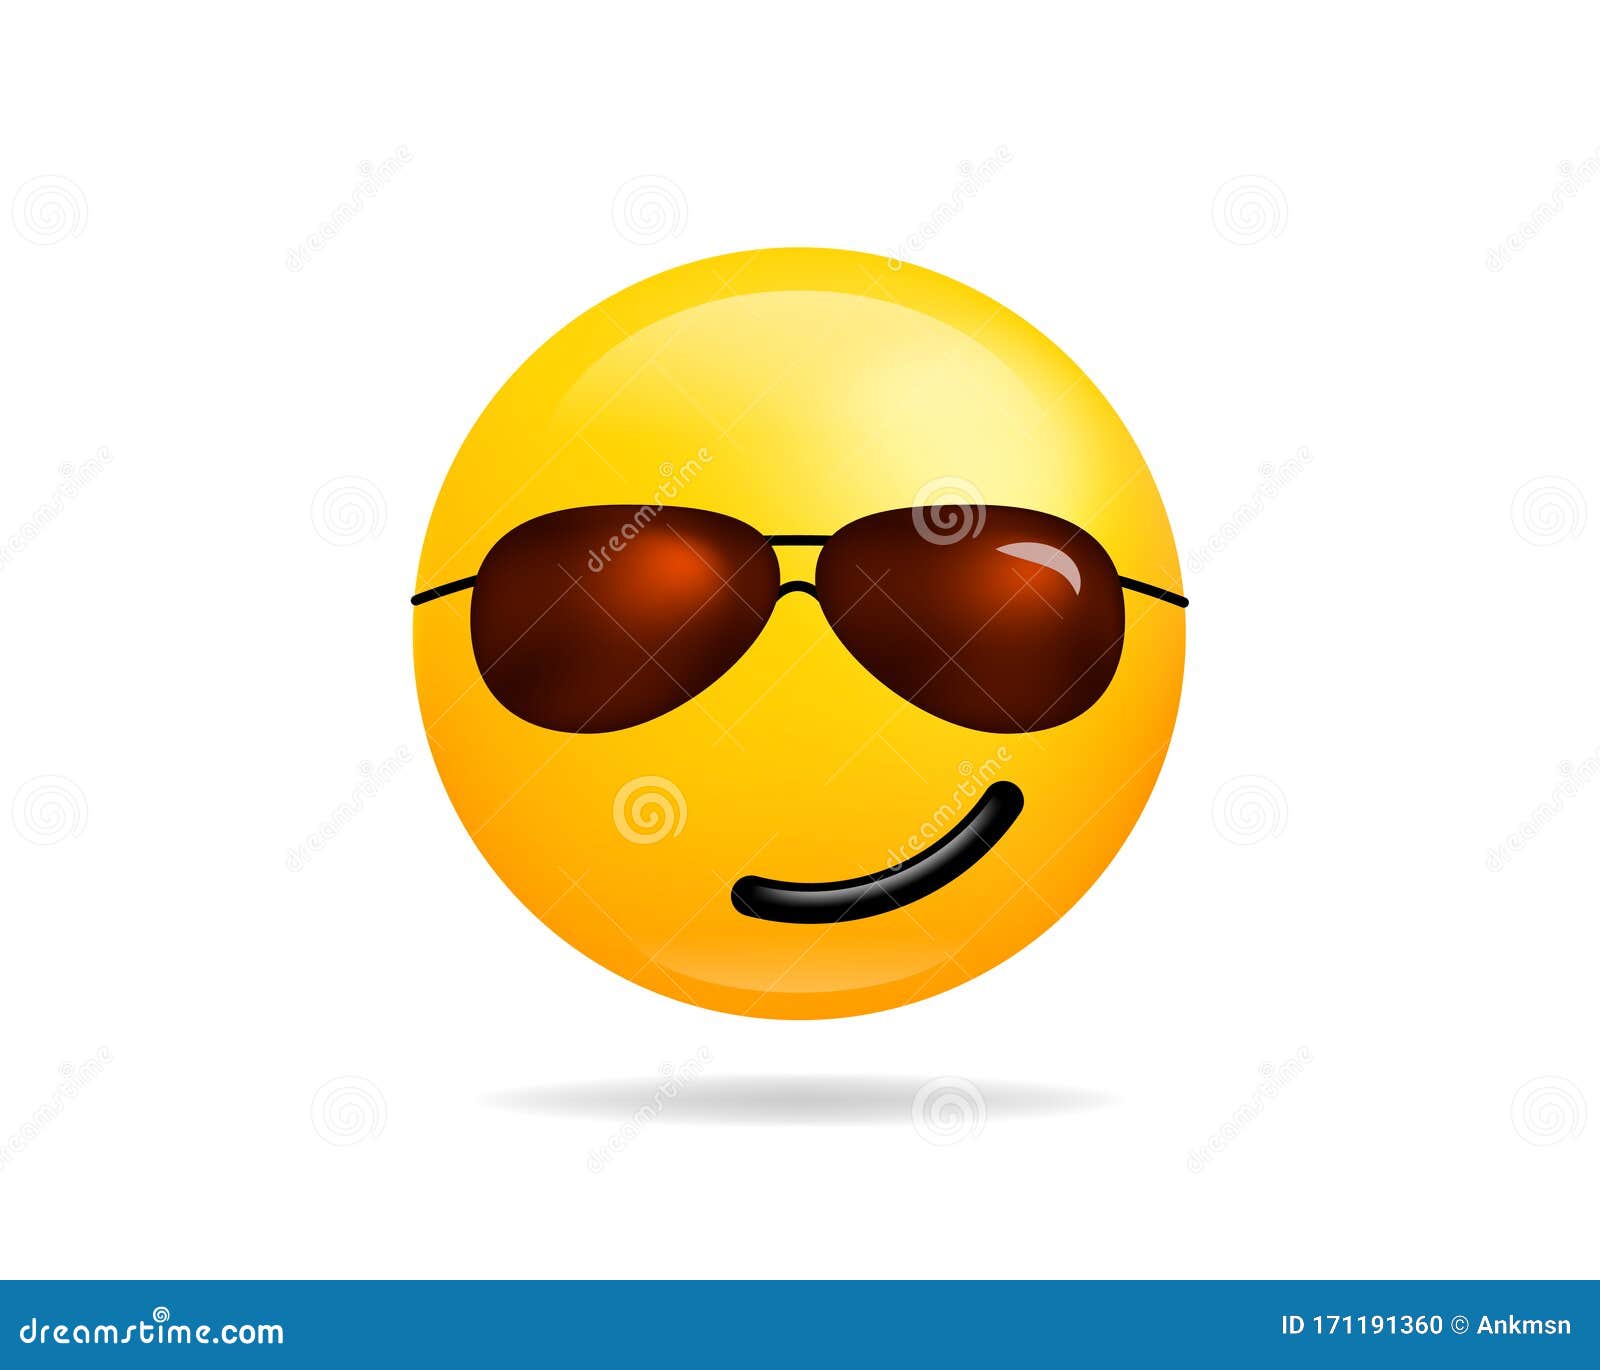 Emoji Icon Vector Symbol. Smiley Face Yellow Cartoon Character Stock Vector - Illustration of ball, mouth: